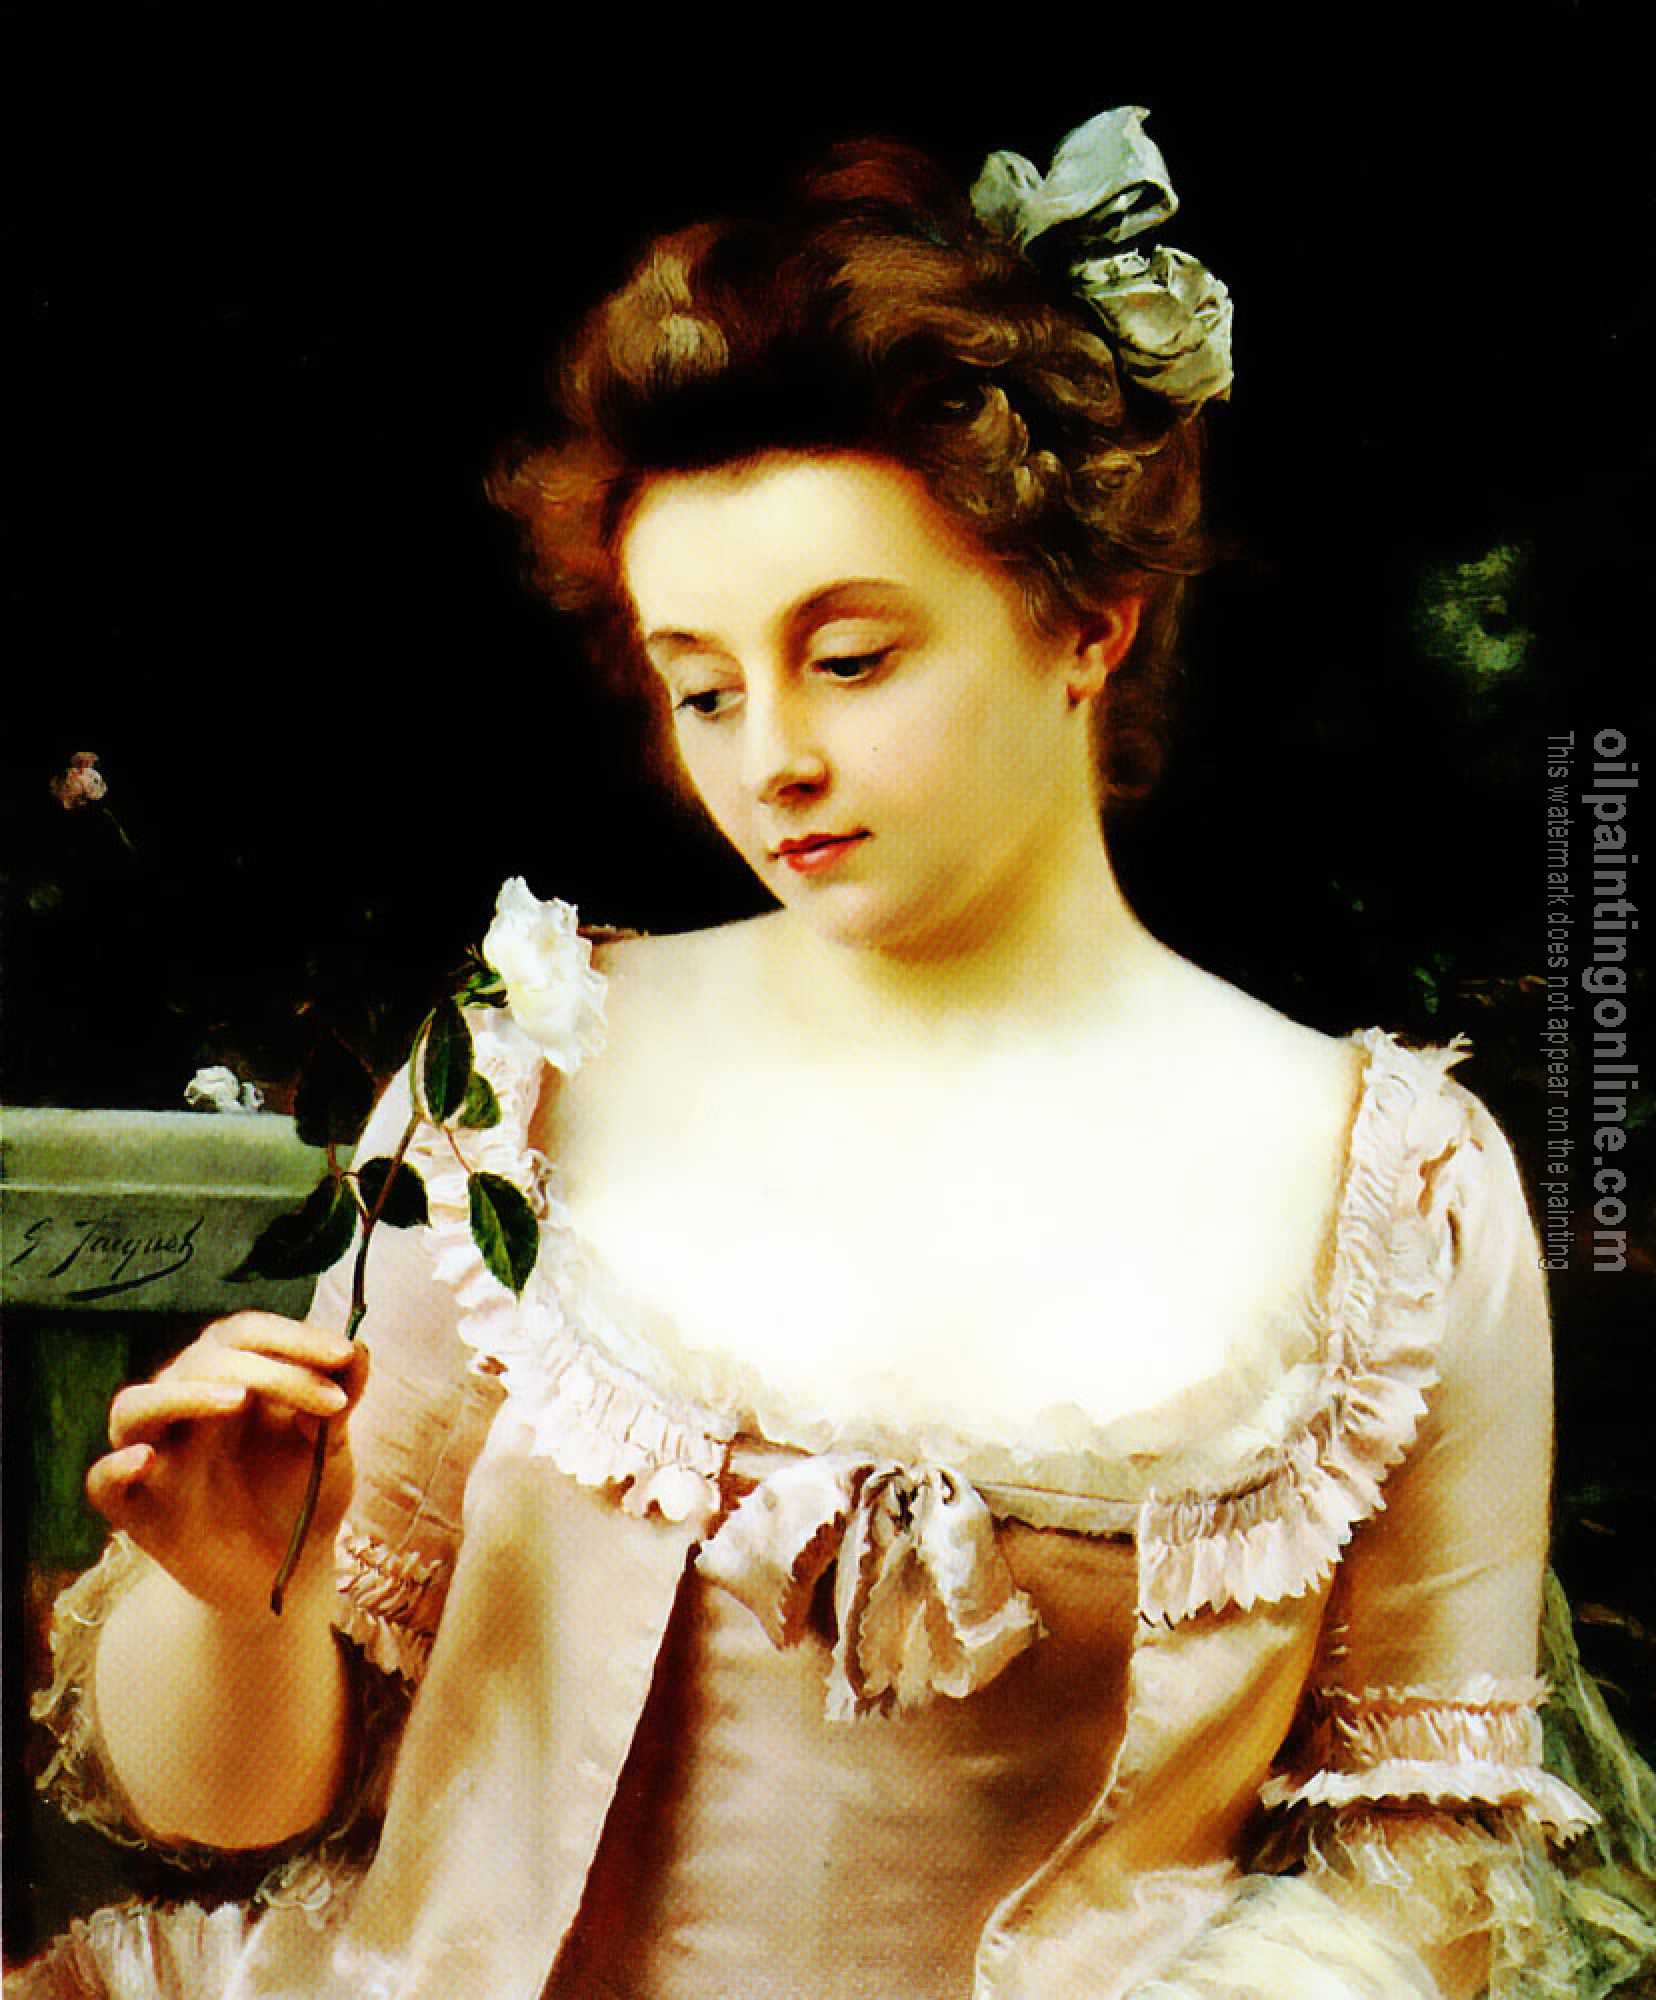 Gustave Jean Jacquet - A Rare Beauty